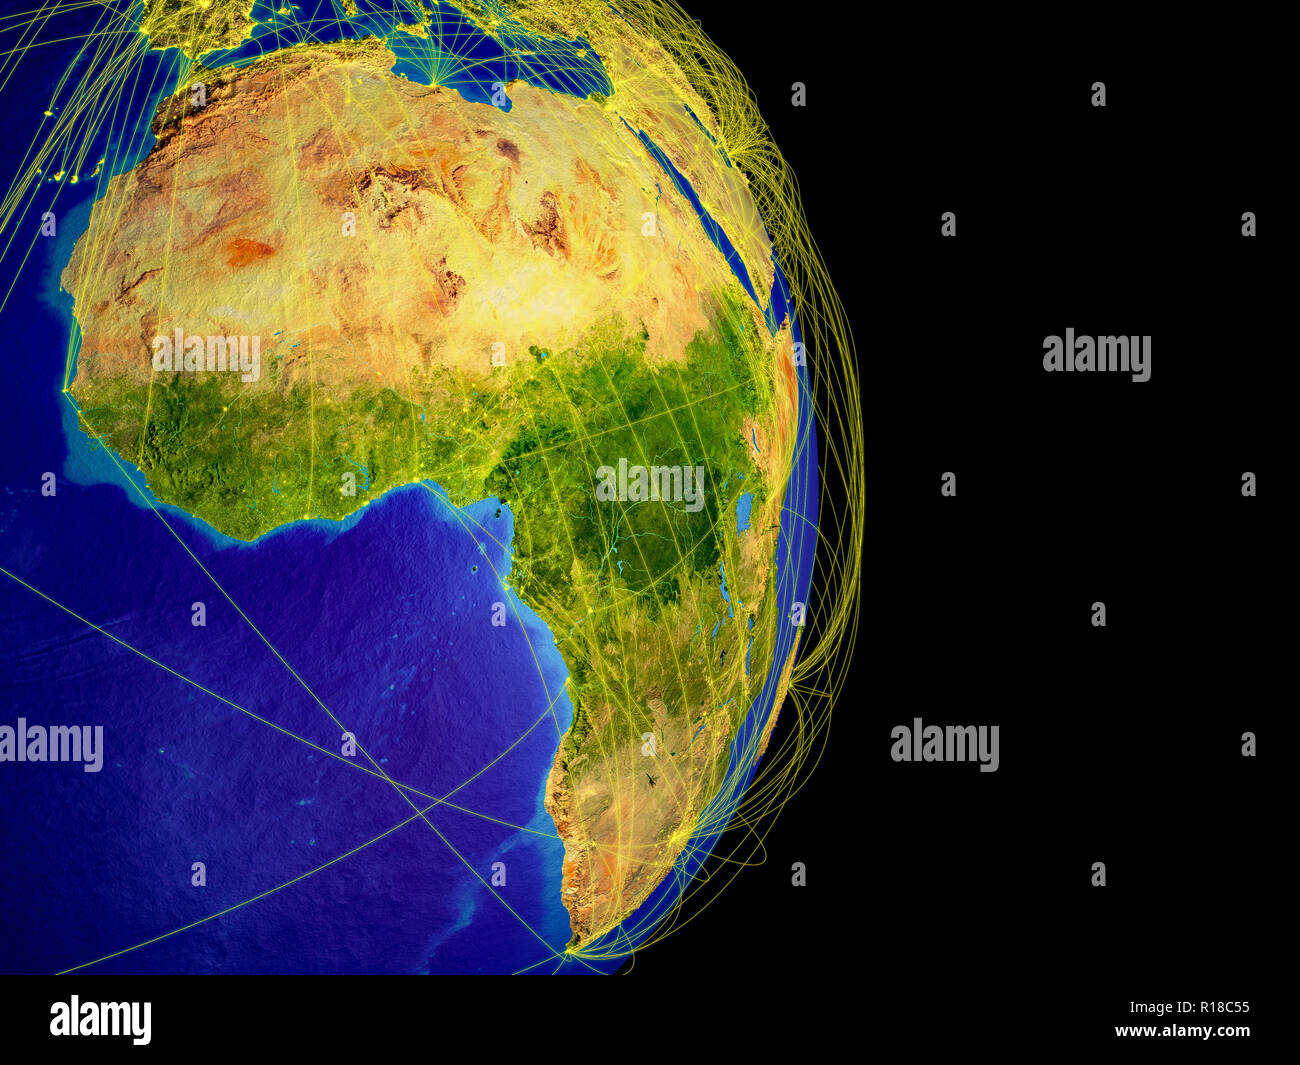 Africa on Earth with trajectories representing international communication, travel, connections. 3D illustration. Elements of this image furnished by  Stock Photo